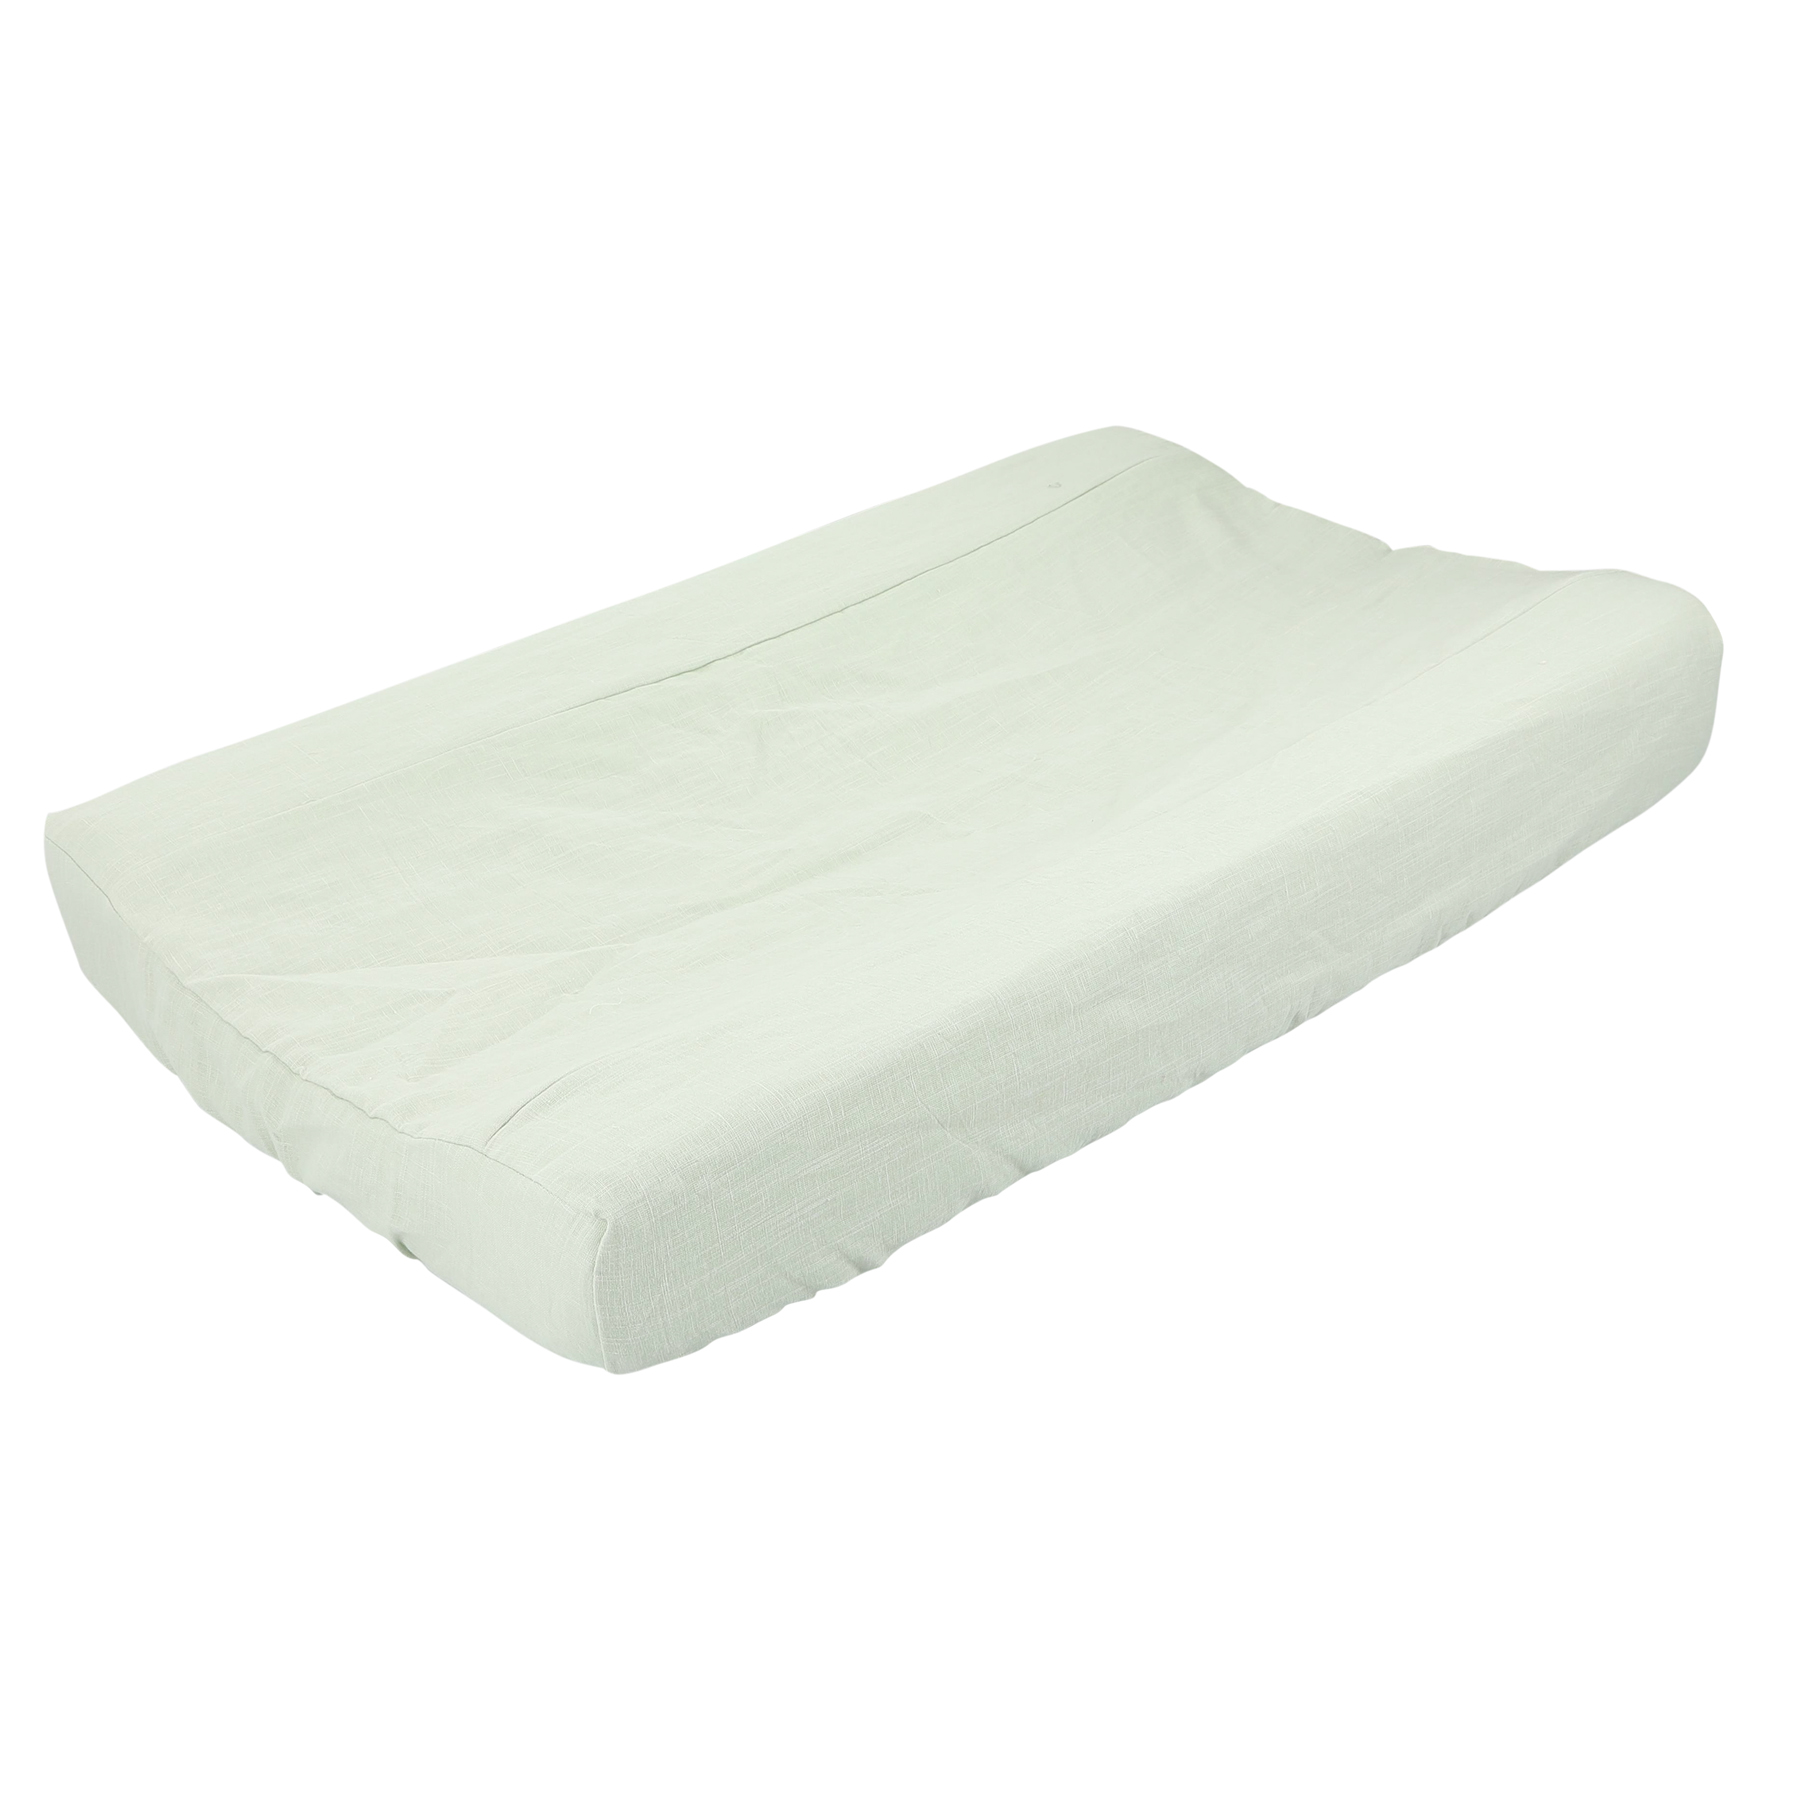 Changing pad cover | 70x45cm - Pure Mint